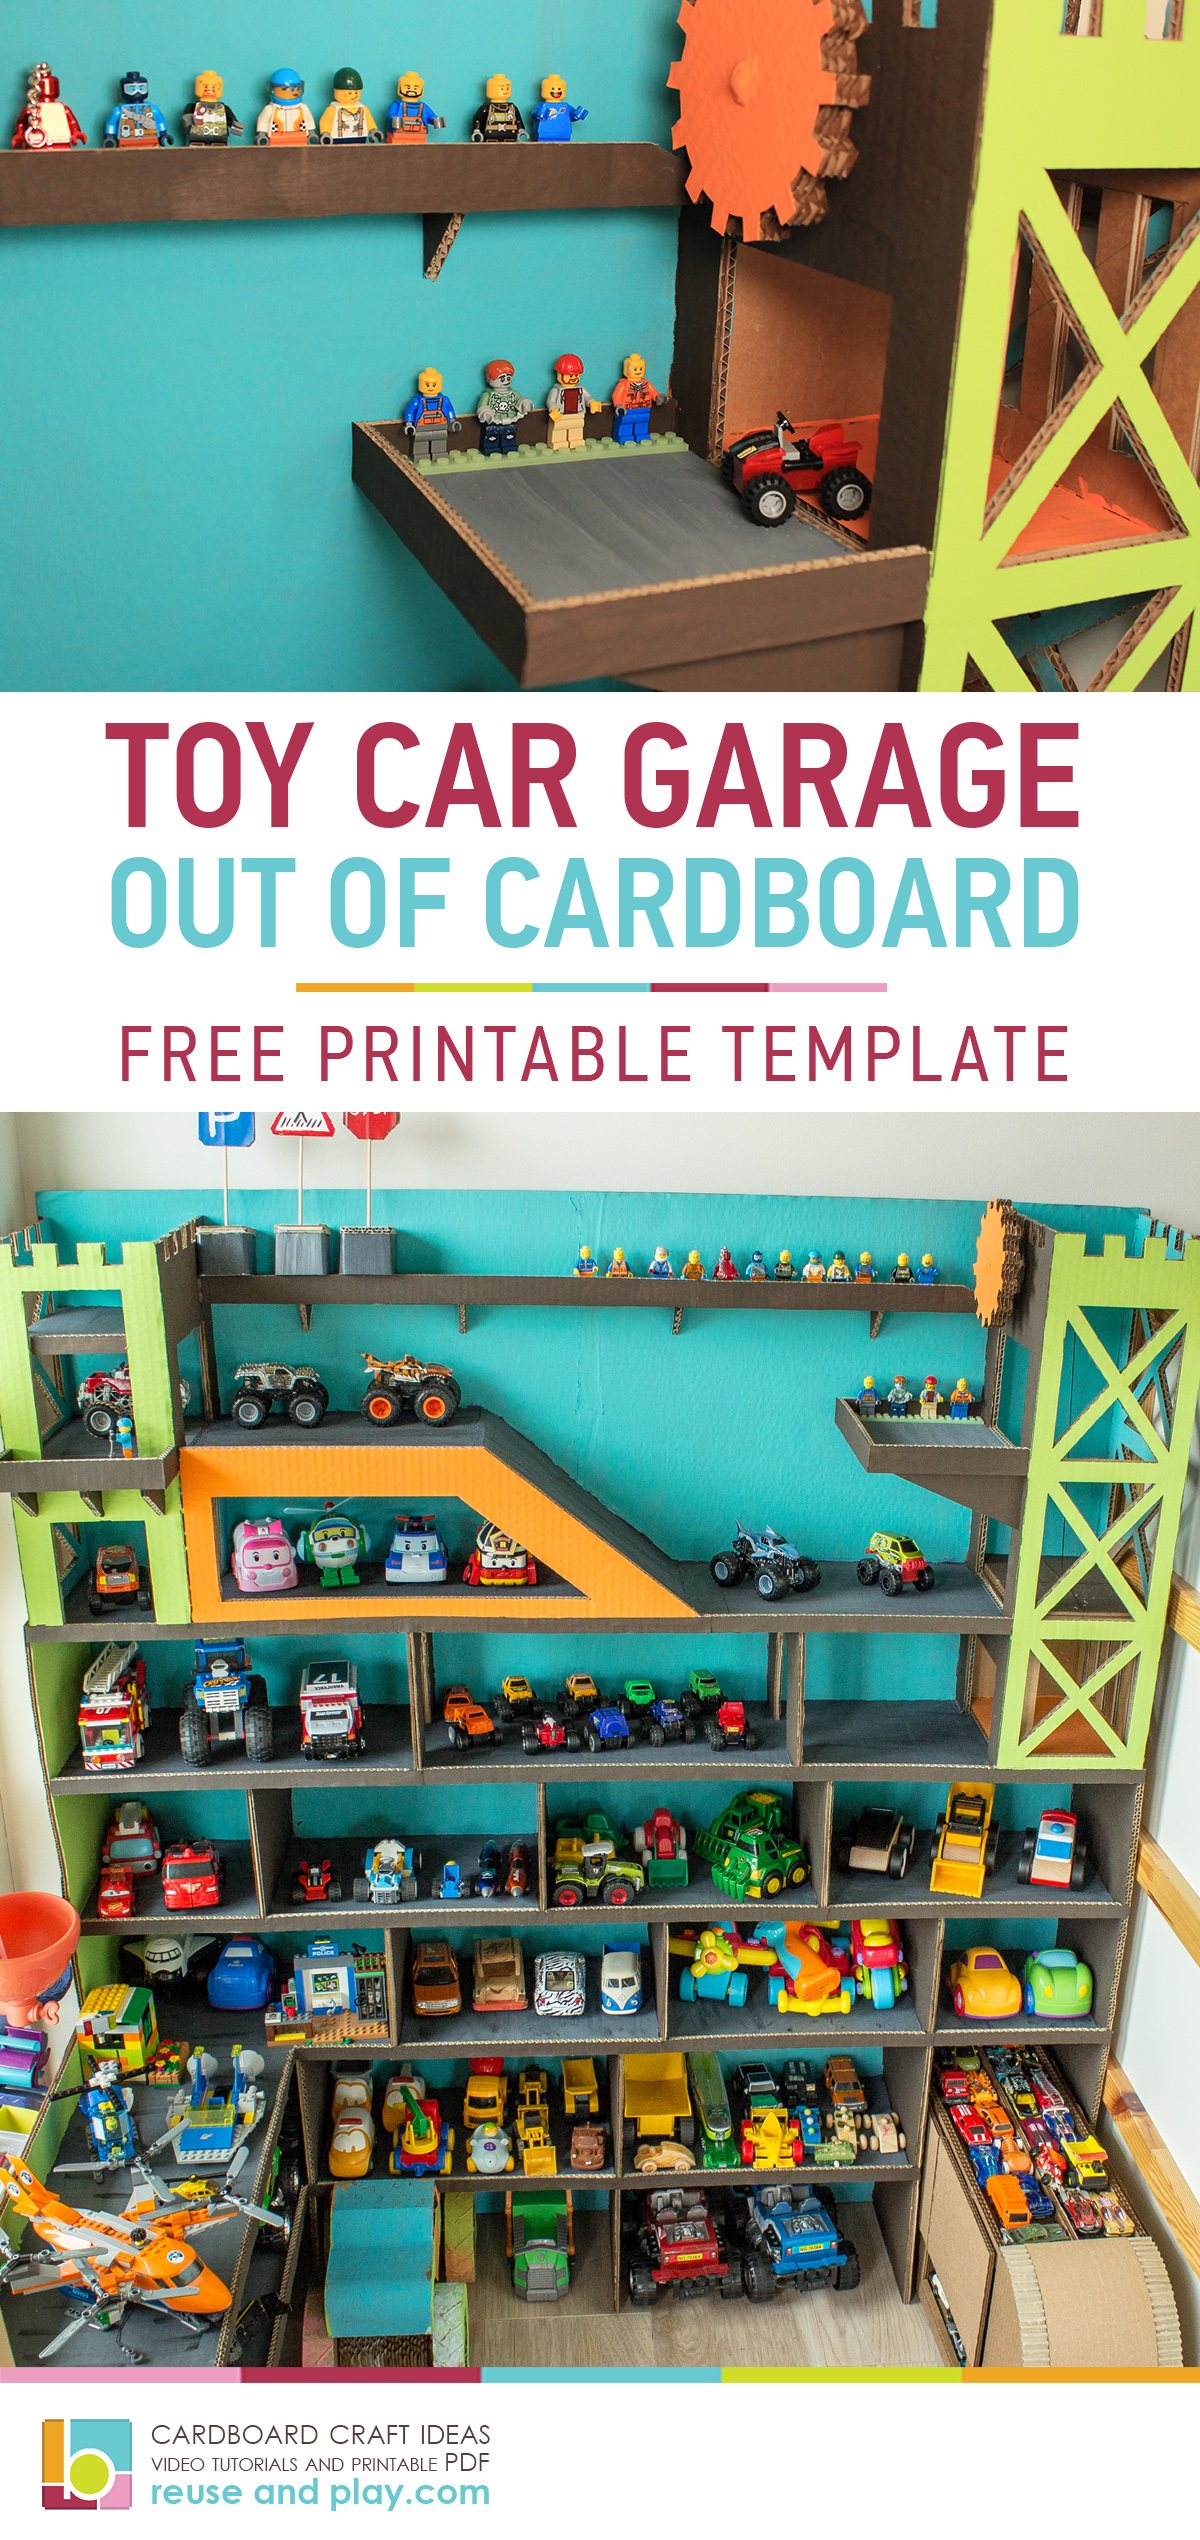 Organizing Concepts for Kids: Garage Toys + free printable